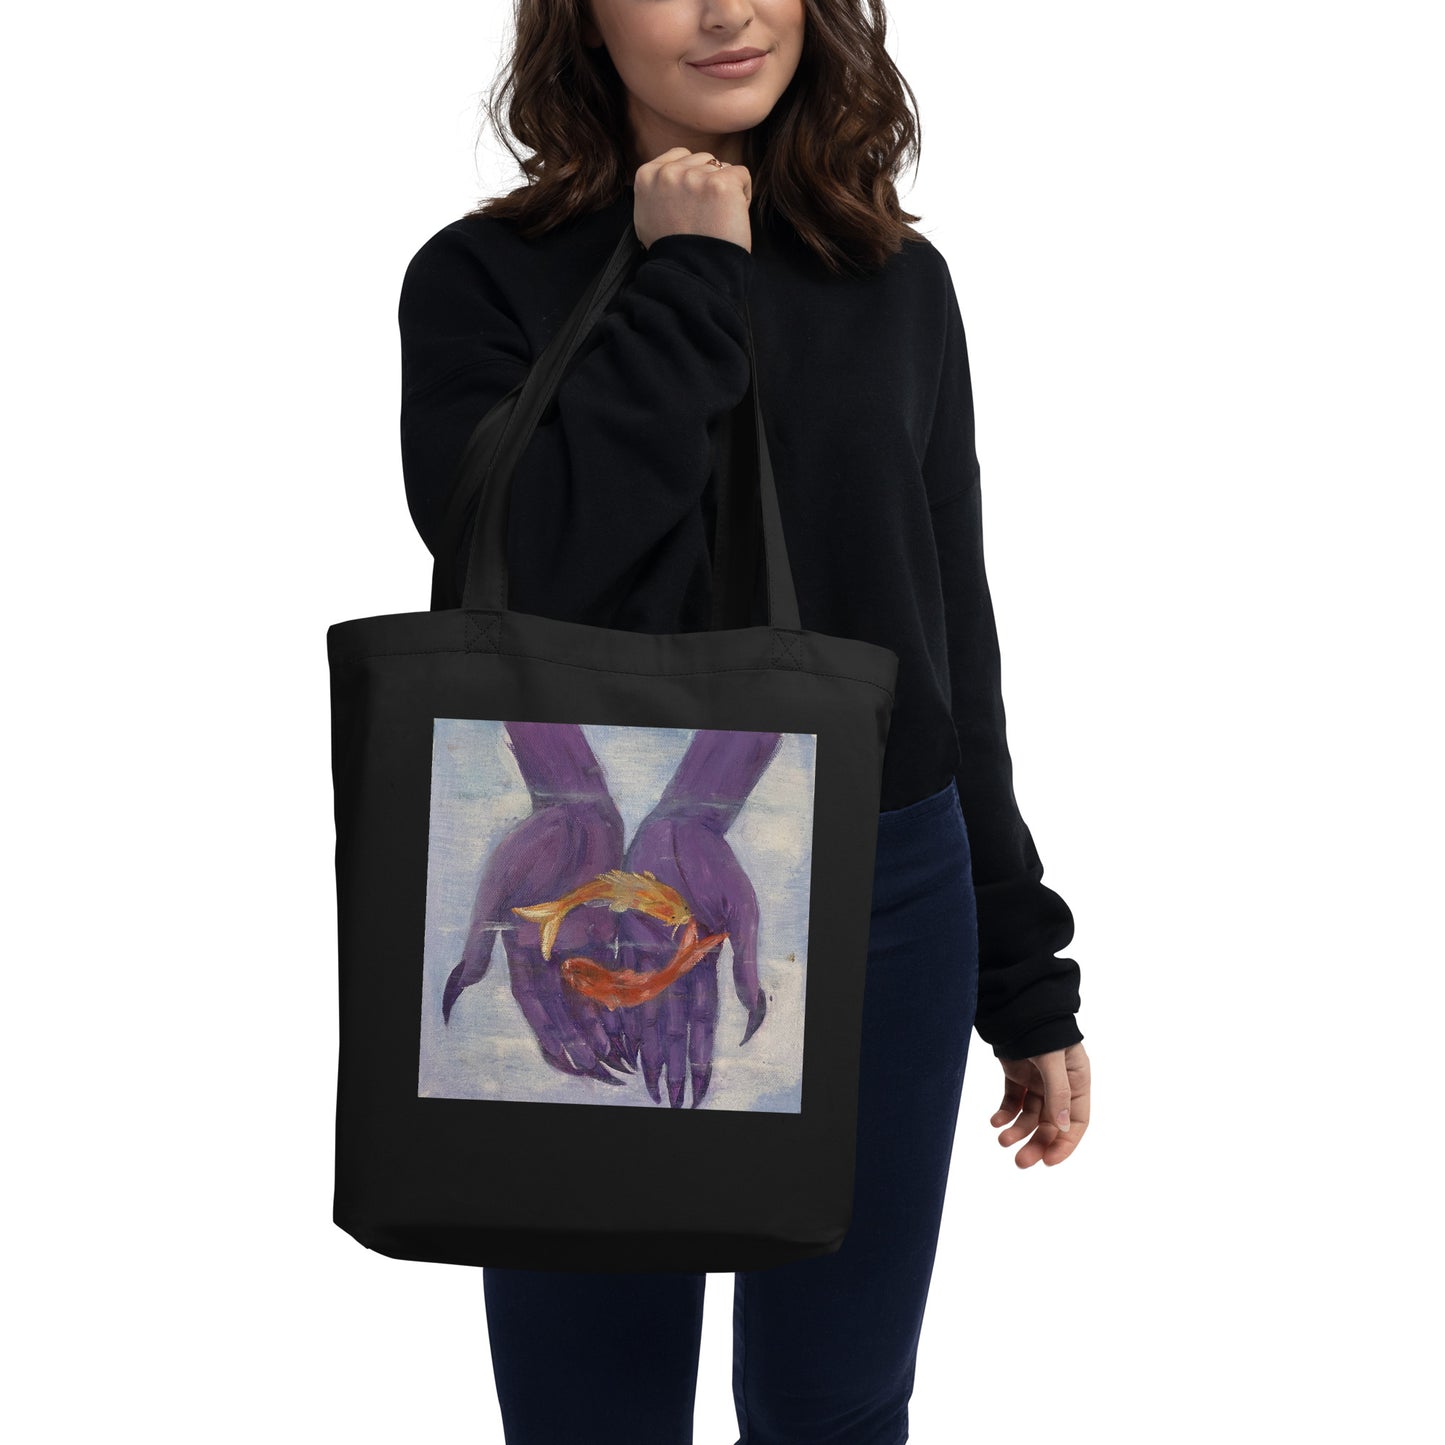 'Dilemma' Eco Tote bag by Isabella Mignot